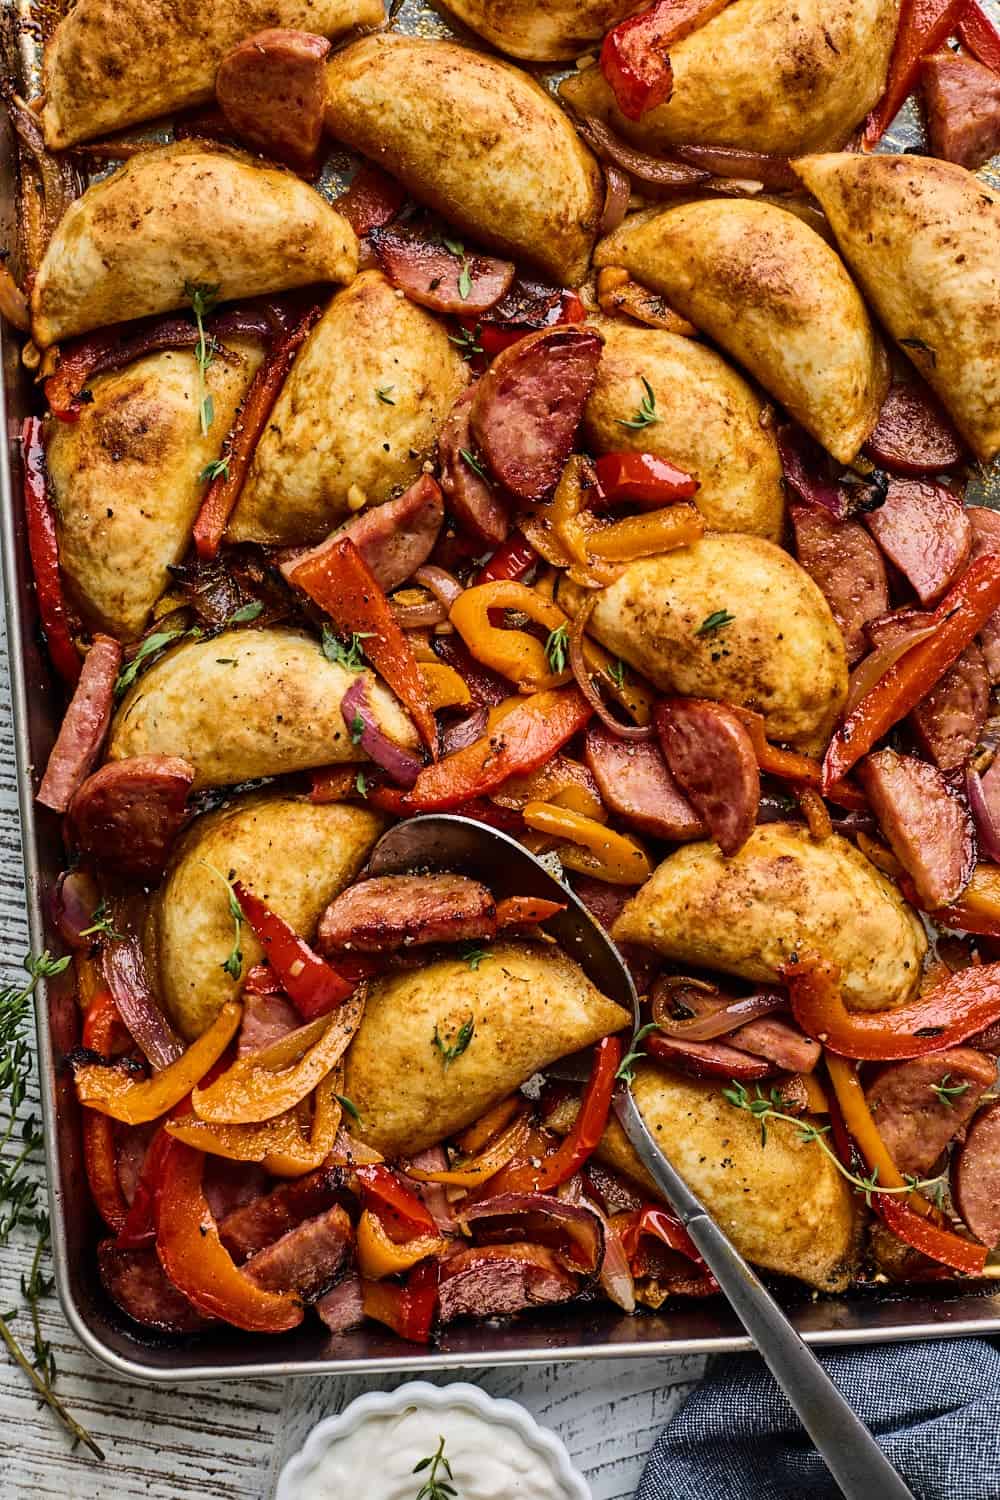 Delicious stuffed peppers and sausages baked on a sheet.